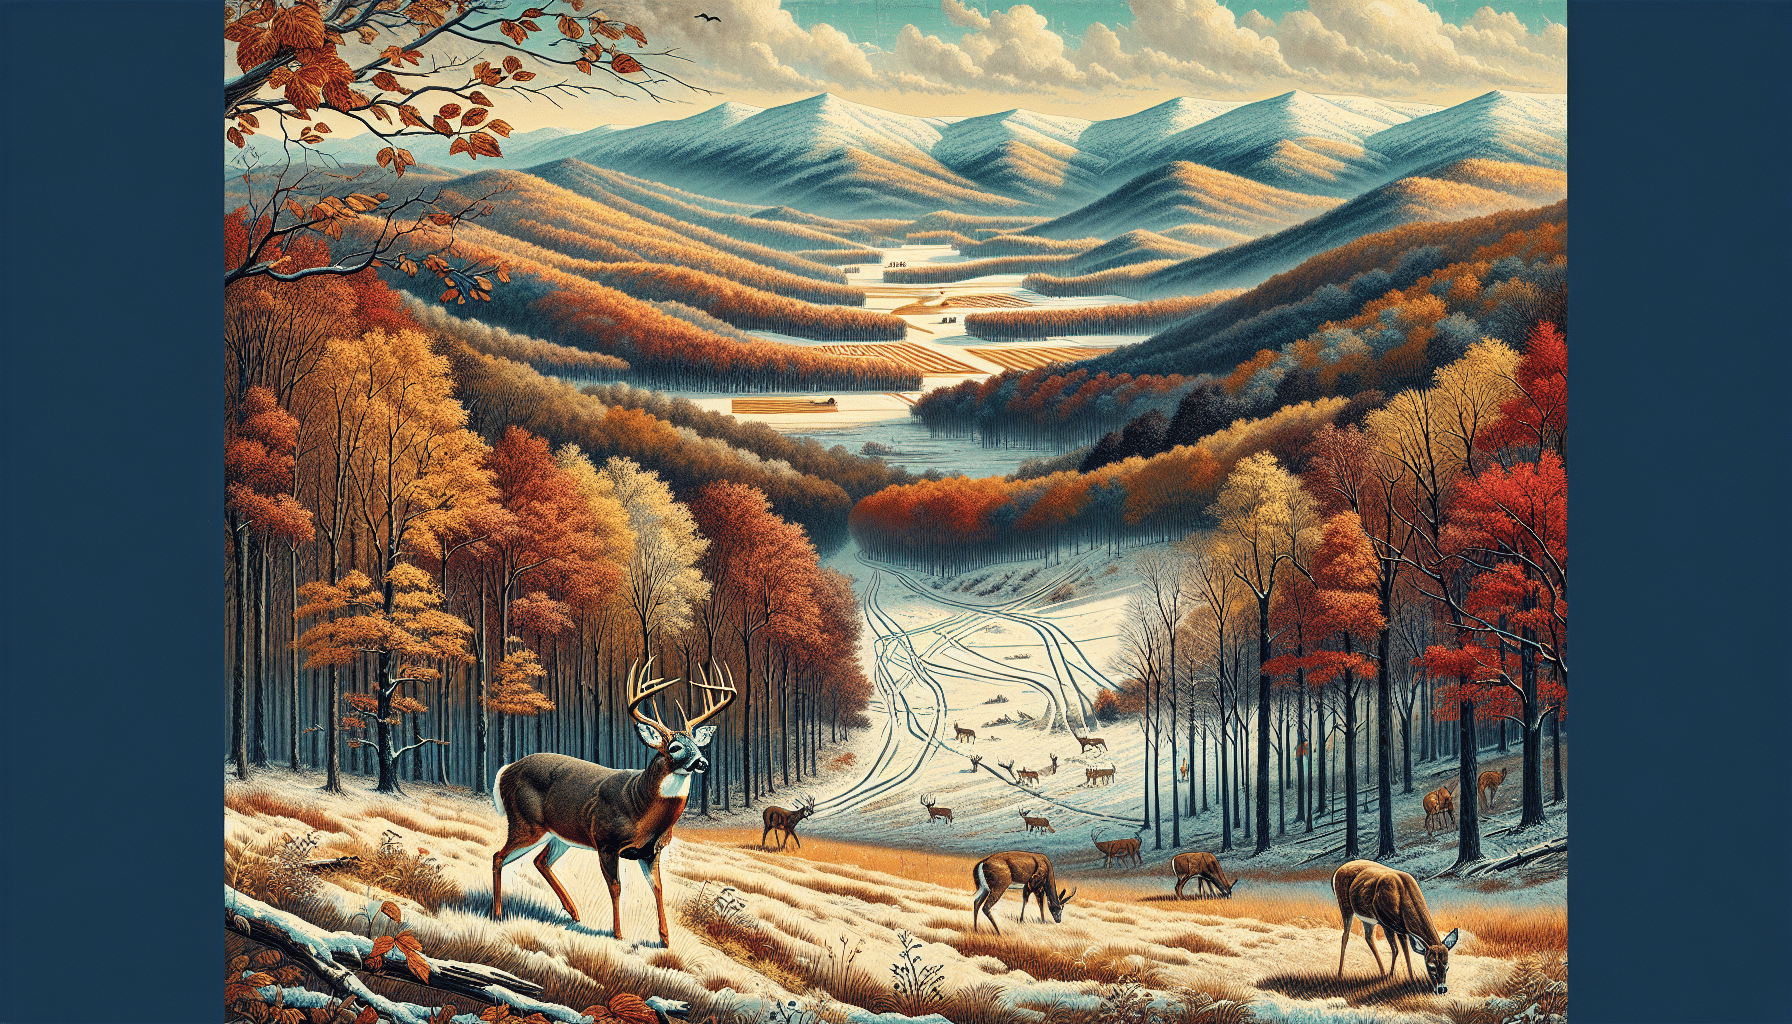 The image unfolds a scenic view of Virginia's diverse terrain marking popular locations for deer hunting. Depict crisp autumnal forests with brown, gold and red leaves shedding from the trees and untouched snowy landscapes delineating a visually appealing contrast. Strikingly beautiful deer graze in a safe distance, featuring a variety of deer species like White-tailed deer. Trails through the forests suggest the passage of hunters. There are no people, text or brand references present in the vistas. The tranquillity of the environment induces a sense of calm while hinting at the inherent thrill of the hunt.